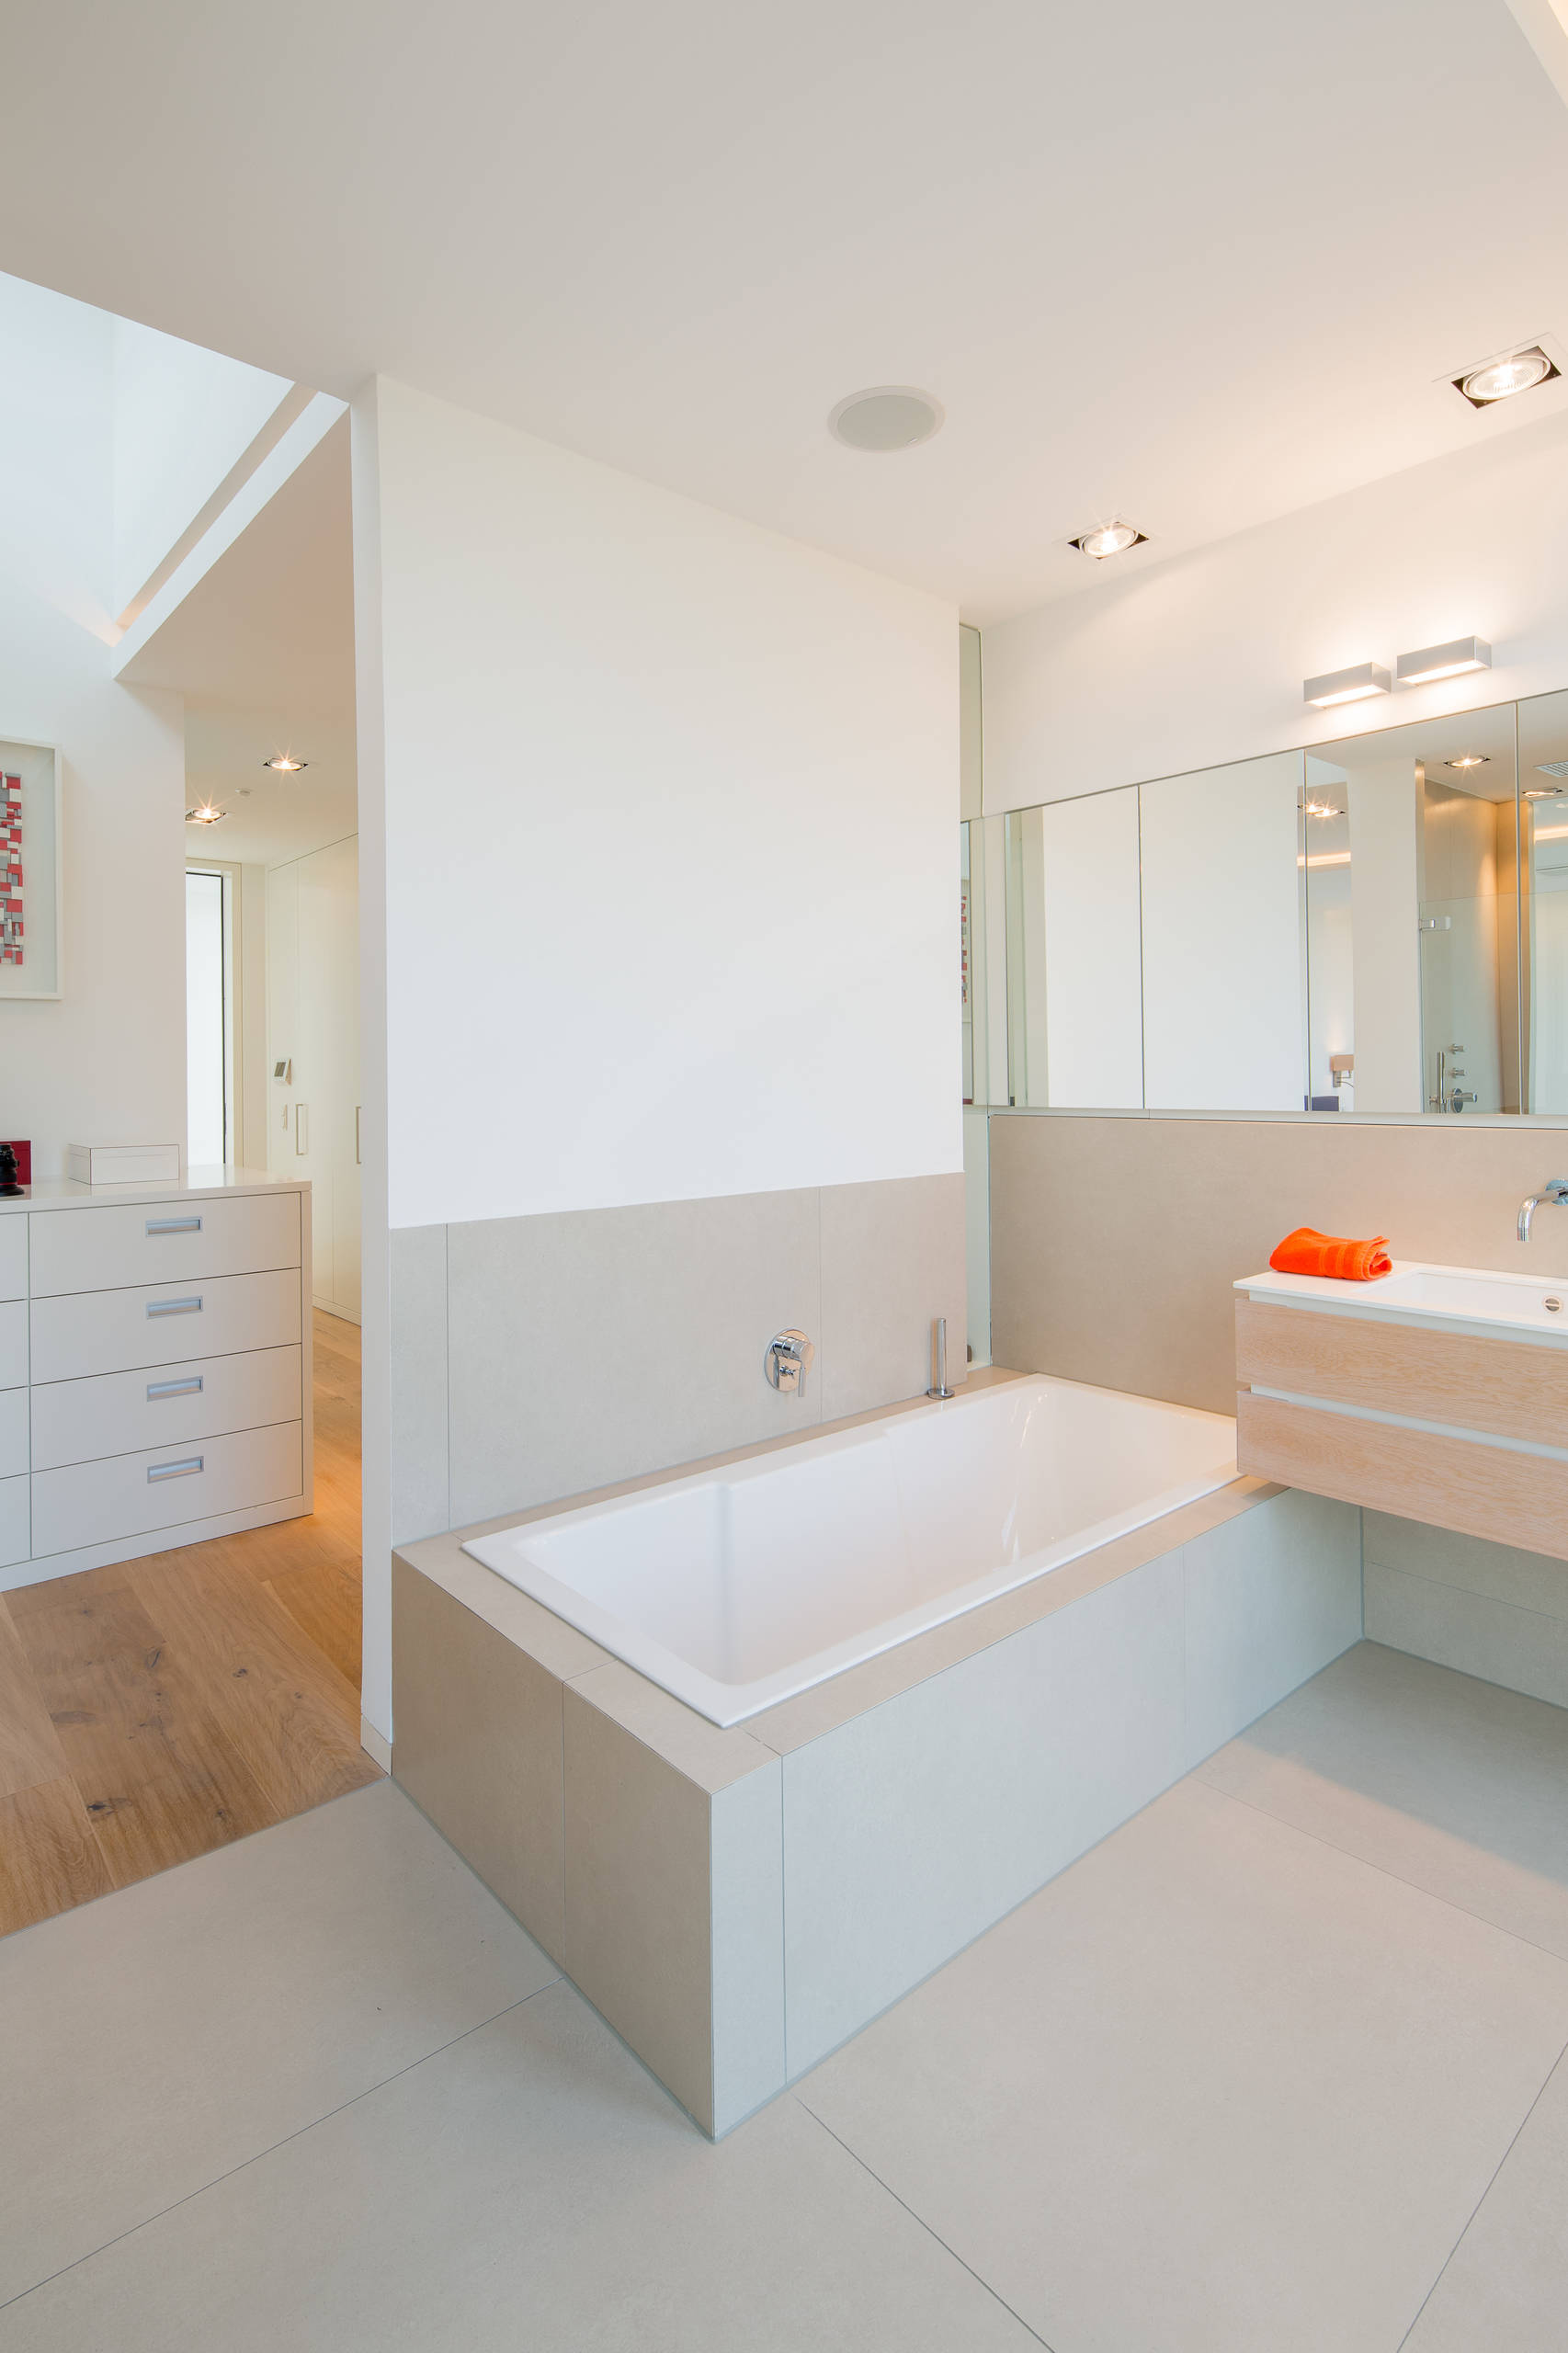 75 Beautiful Bathroom With Beige Cabinets And Solid Surface Countertops Pictures Ideas Houzz